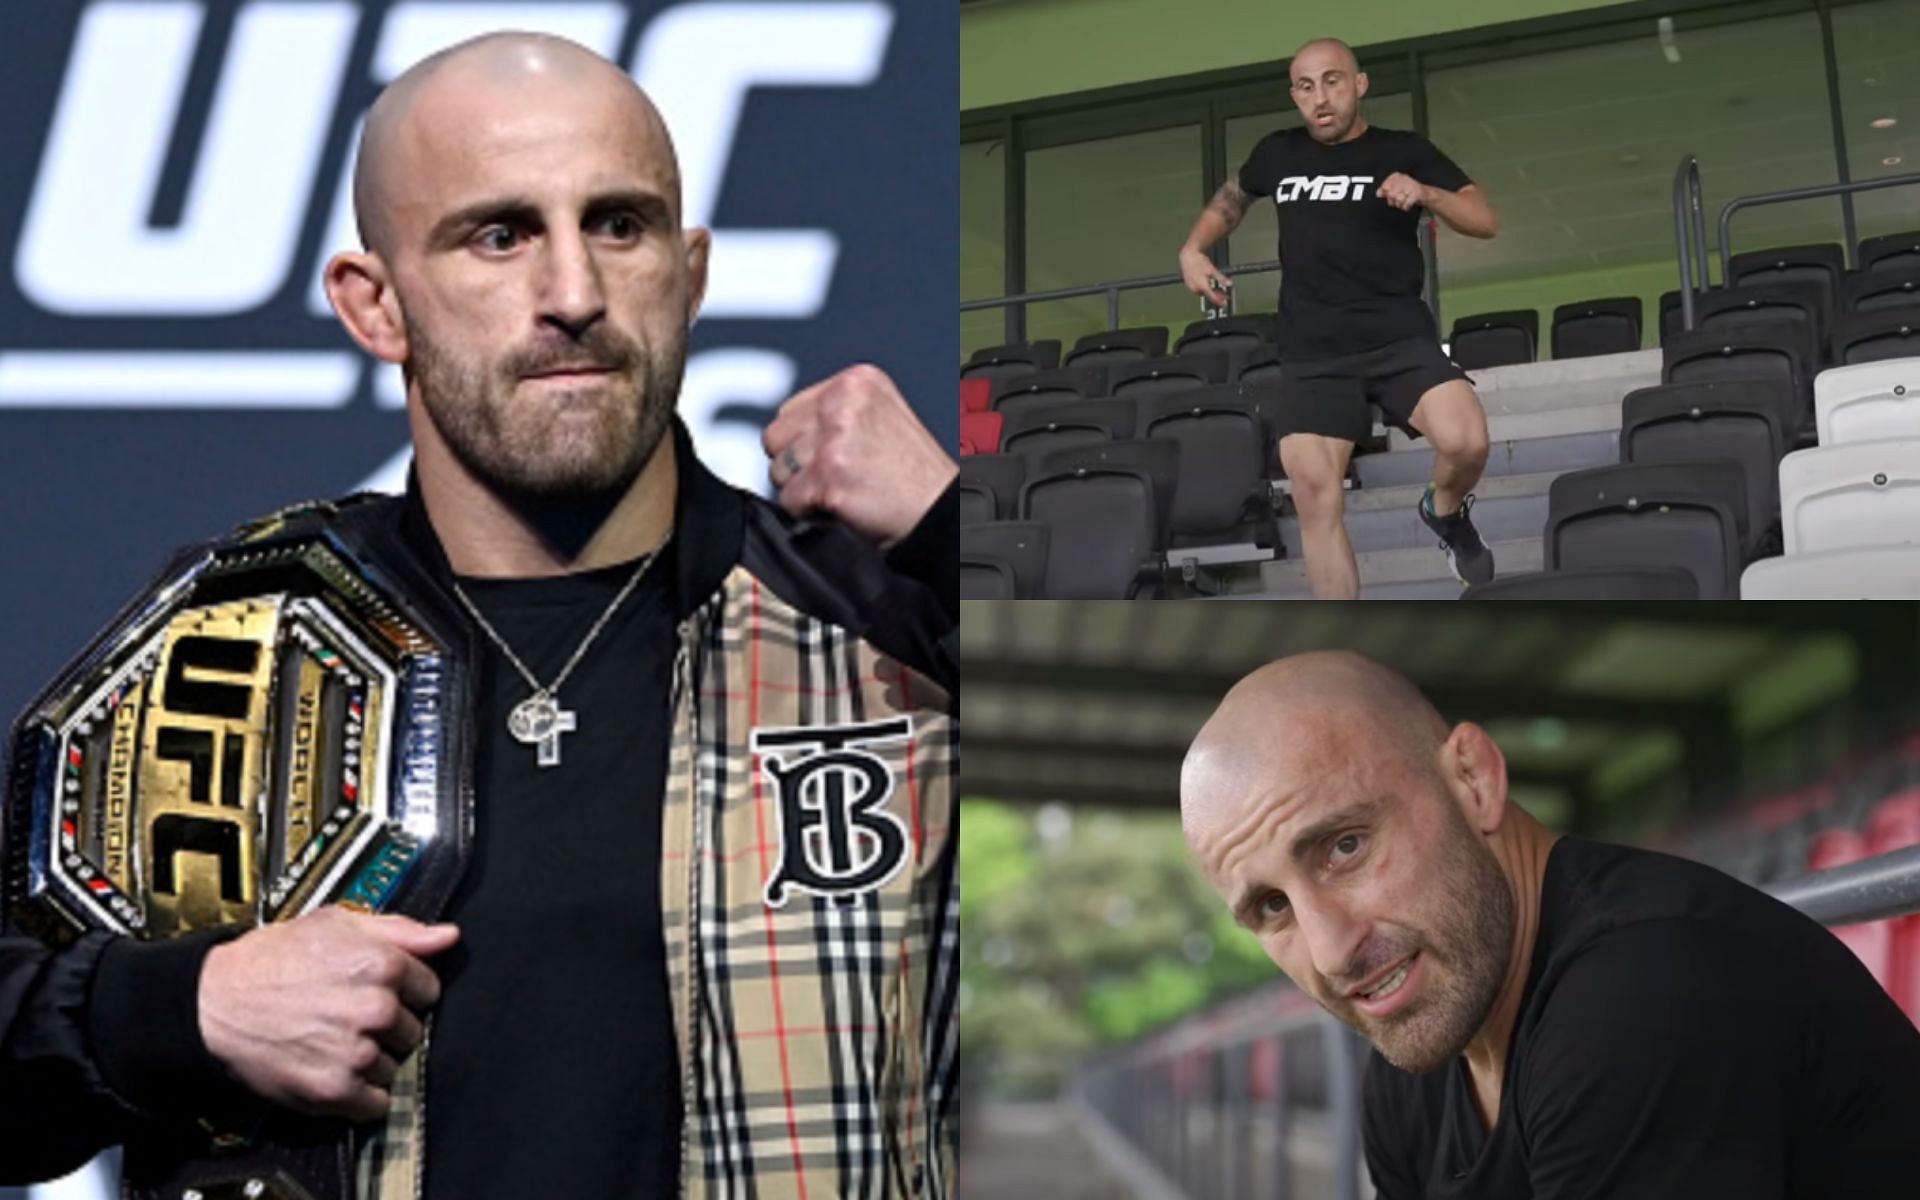 Alexander Volkanovski is currently one of the top pound-for-pound MMA fighters. [*Images courtesy: Getty (left); Alex Volkanovski YouTube channel (right)]